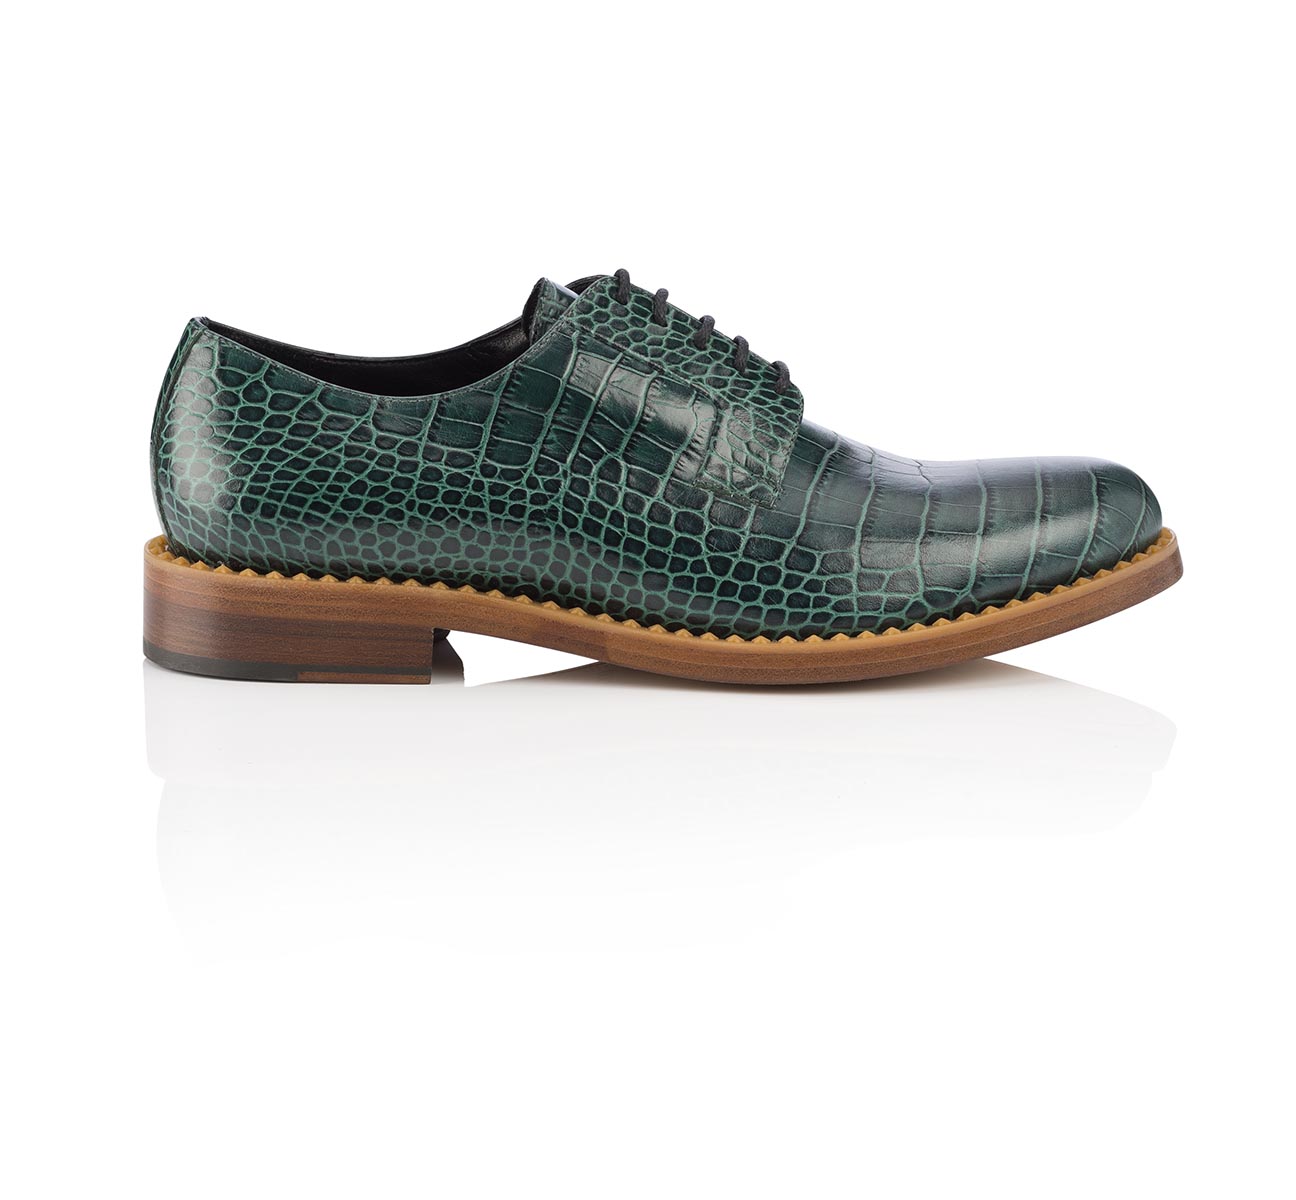 ALARIC- SHINY CROC EMBOSSED LEATHER- PEACOCK GREEN